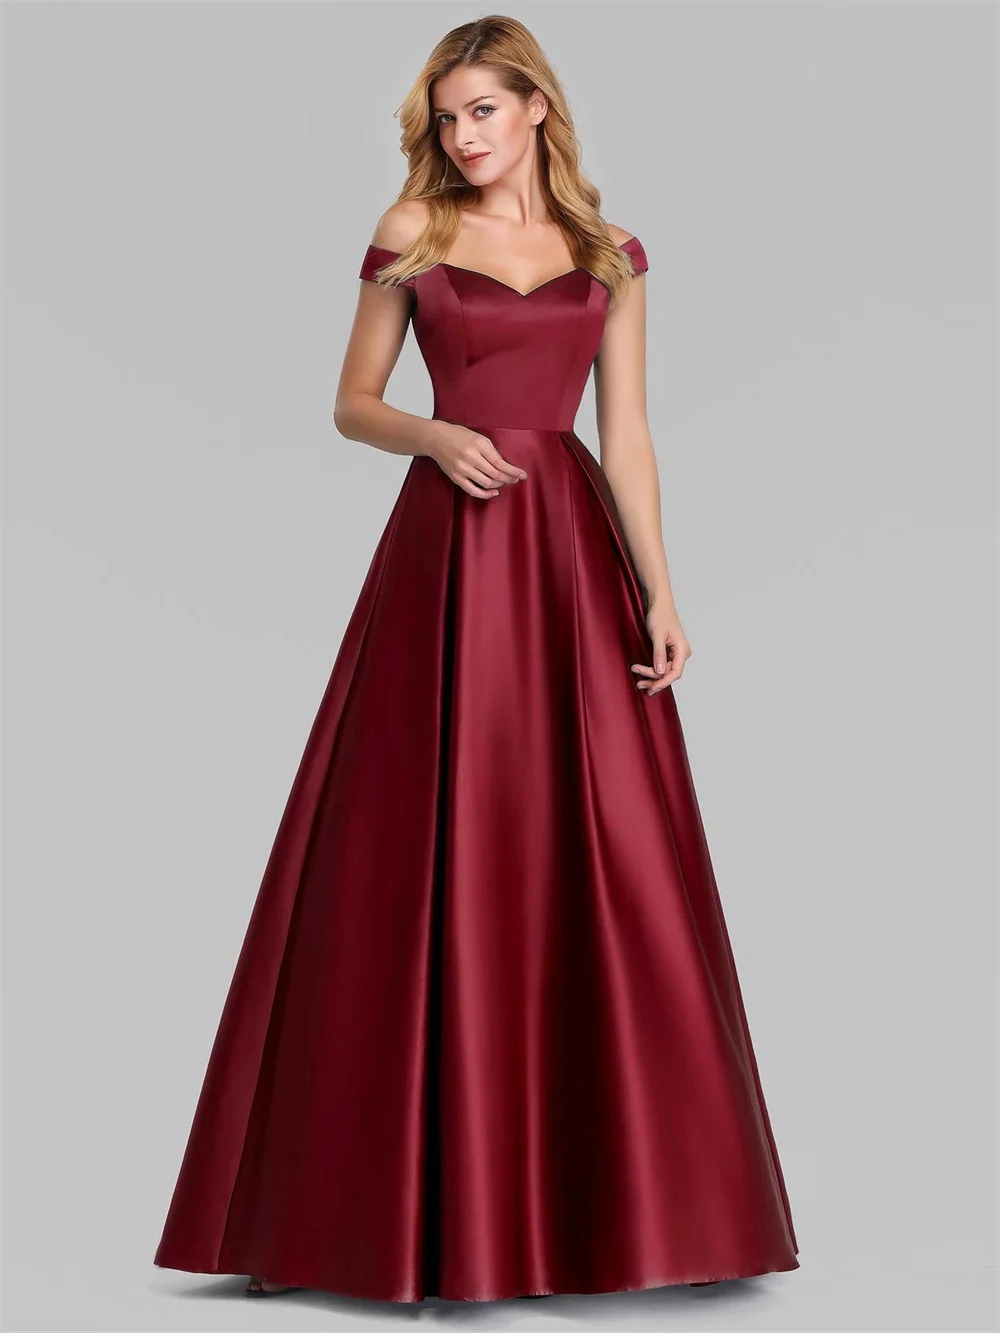 Elegant Women Evening Party Dress 2023 New in Sexy V-neck High Waist Maxi Gowns Ladies Boutique Prom Quinceanera Dresses sexy v neck satin evening dresses spaghetti strap side slit prom dress high waist evening gowns party dress robe de soiree